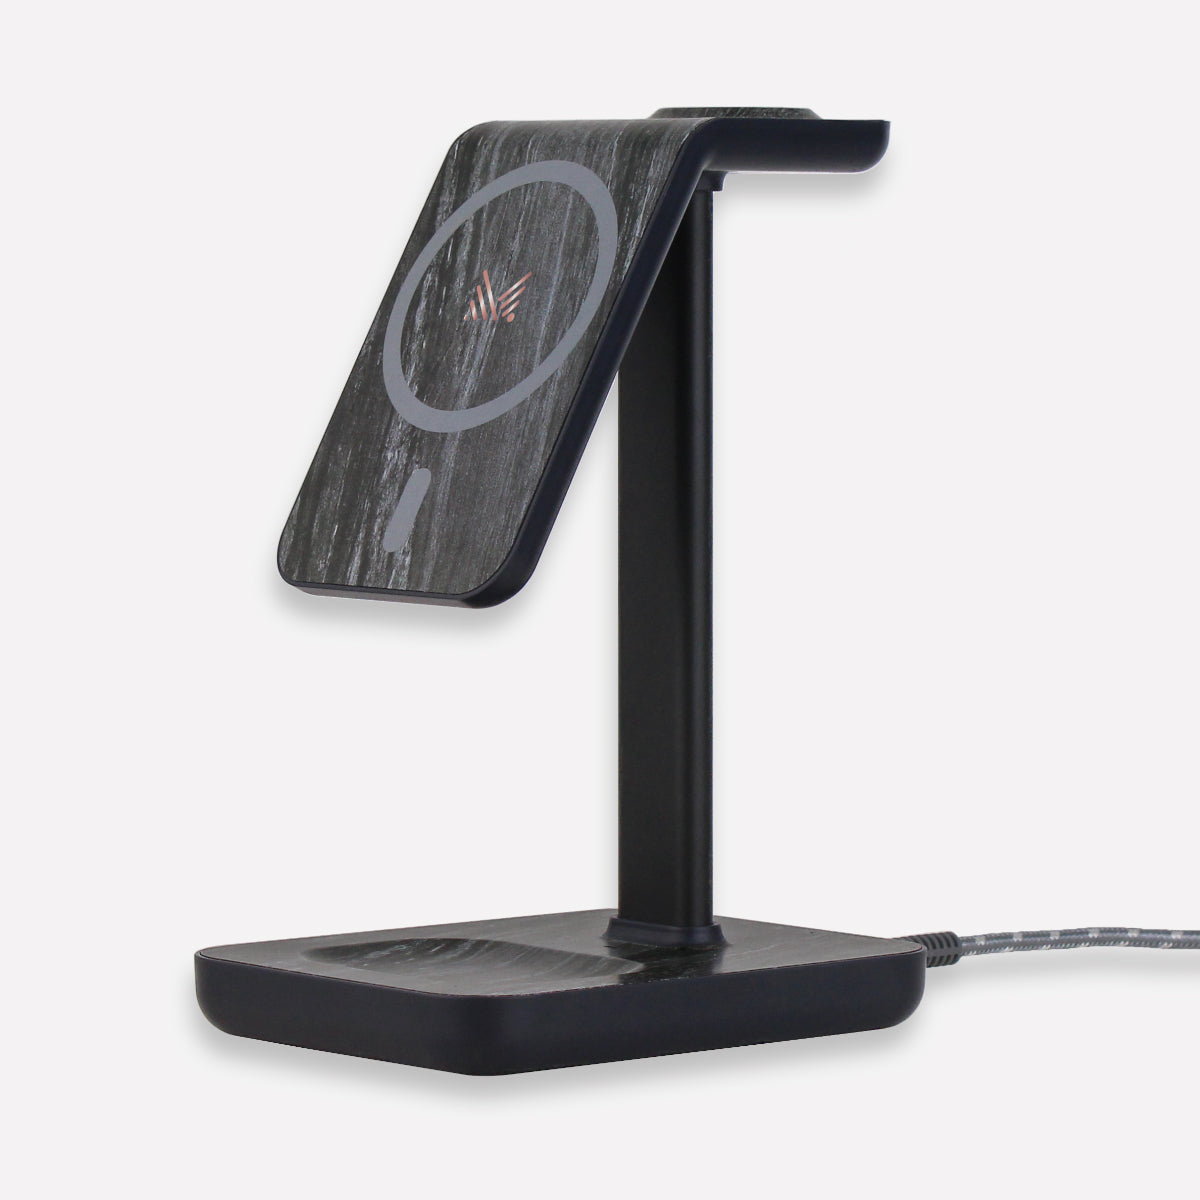 MOTIF 3-in-1 Wireless Charging Stand | Monocozzi - Wake Concept Store  